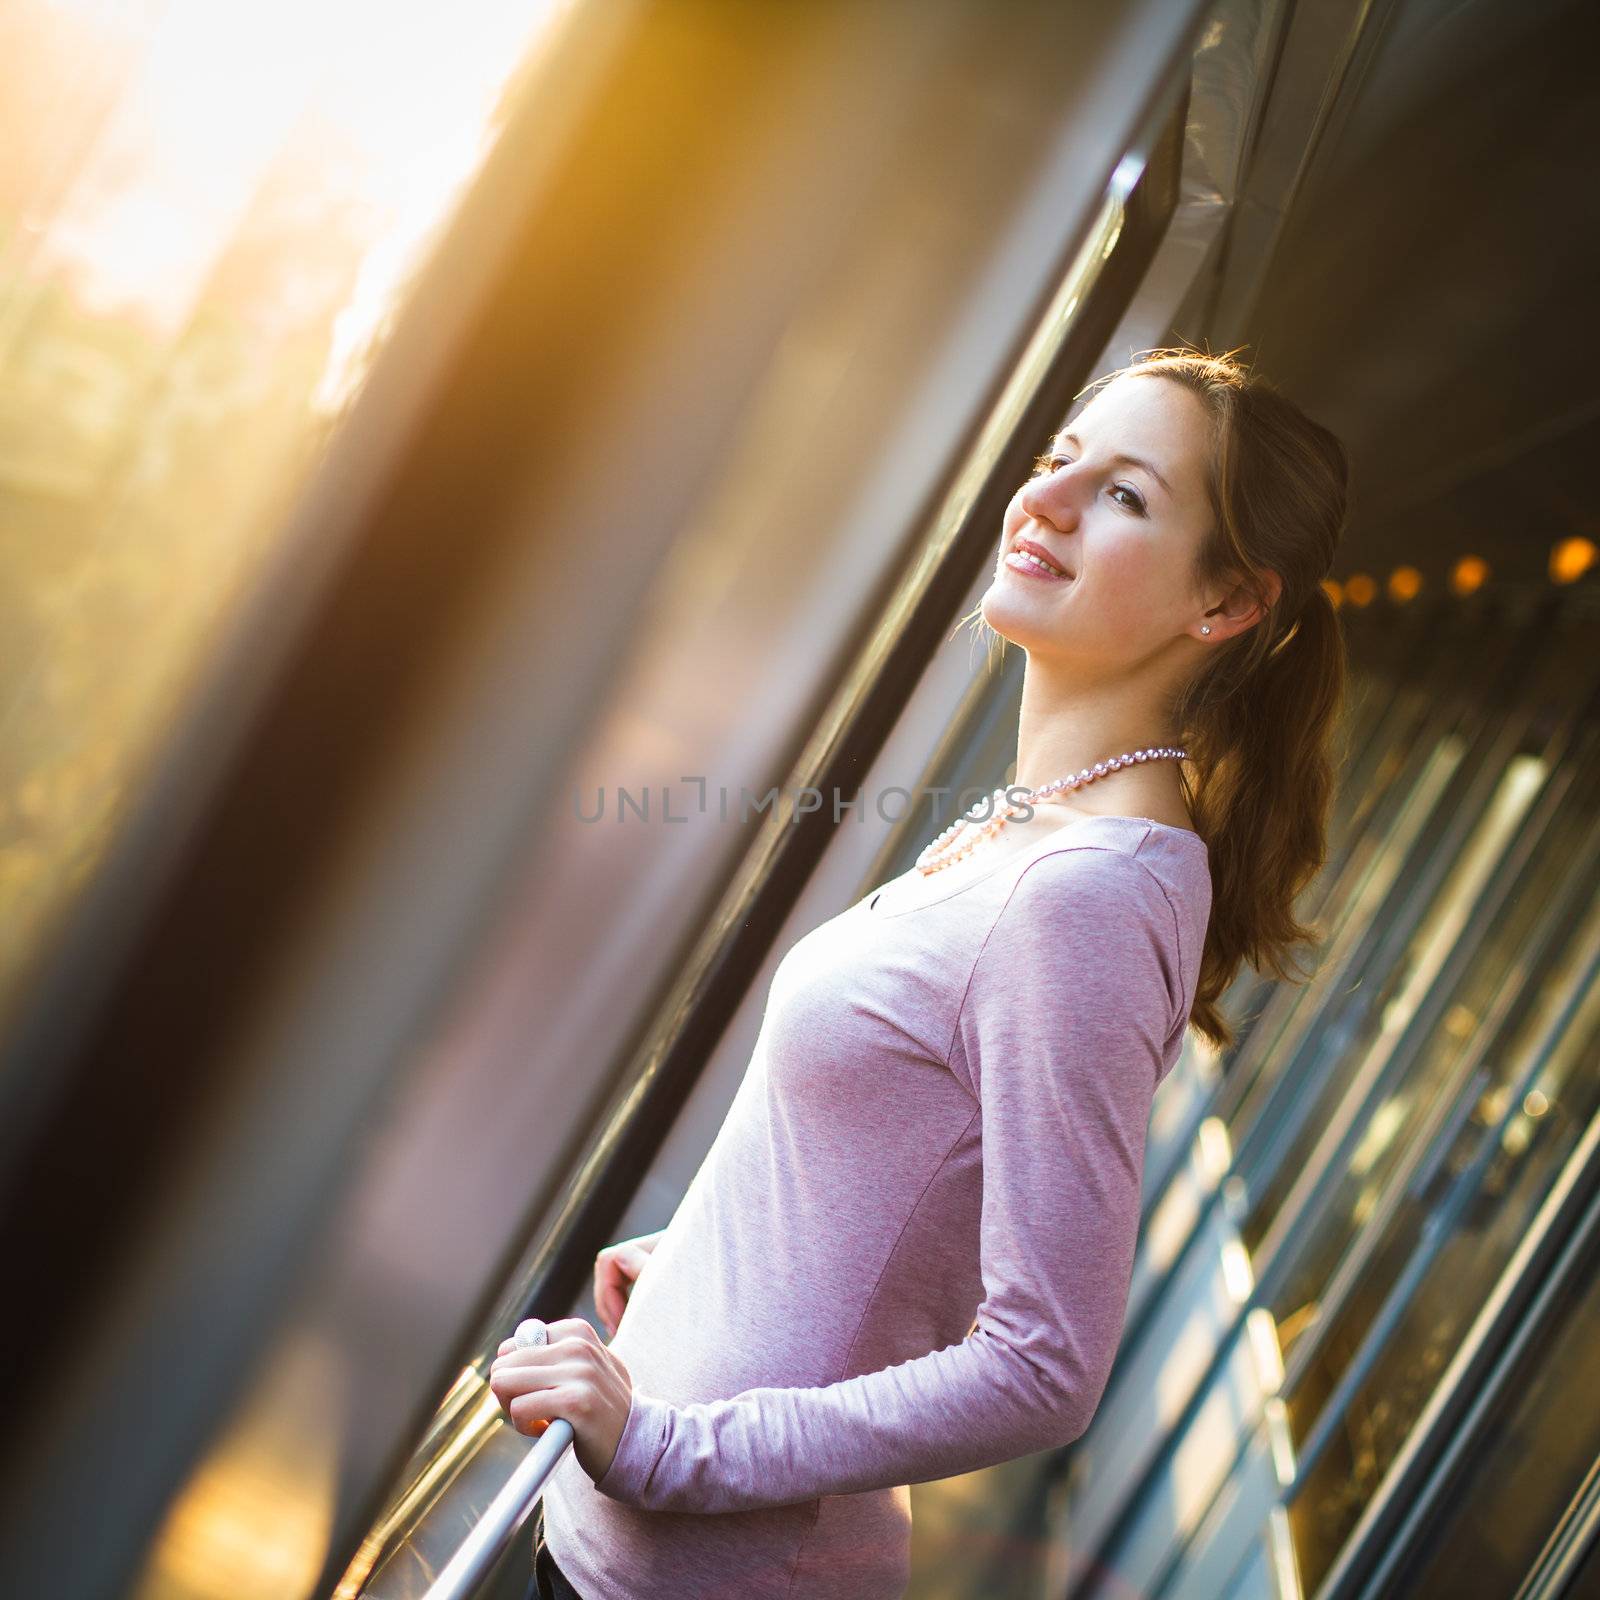 Young woman traveling by train, watching the passing country side while standing in the train corridor